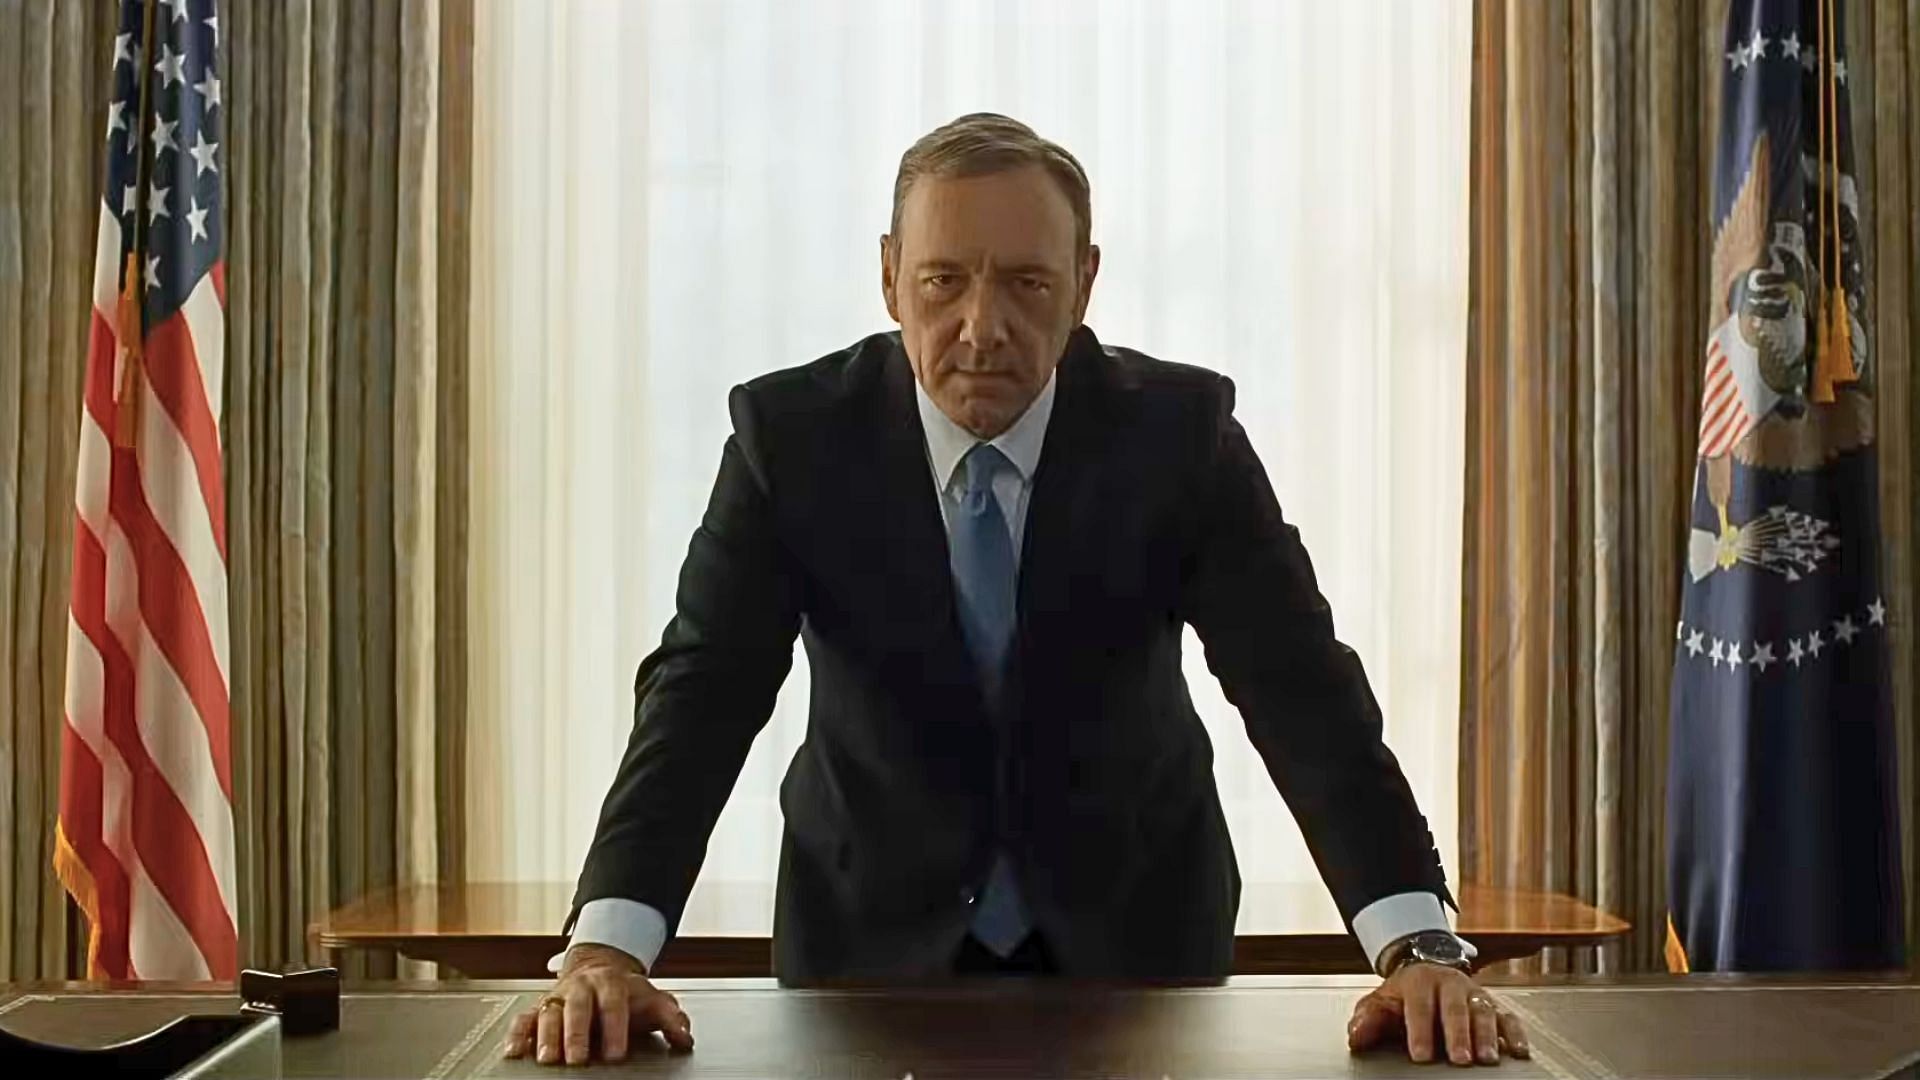 Frank Underwood, played by Kevin Spacey (Image via YouTube/Netflix)